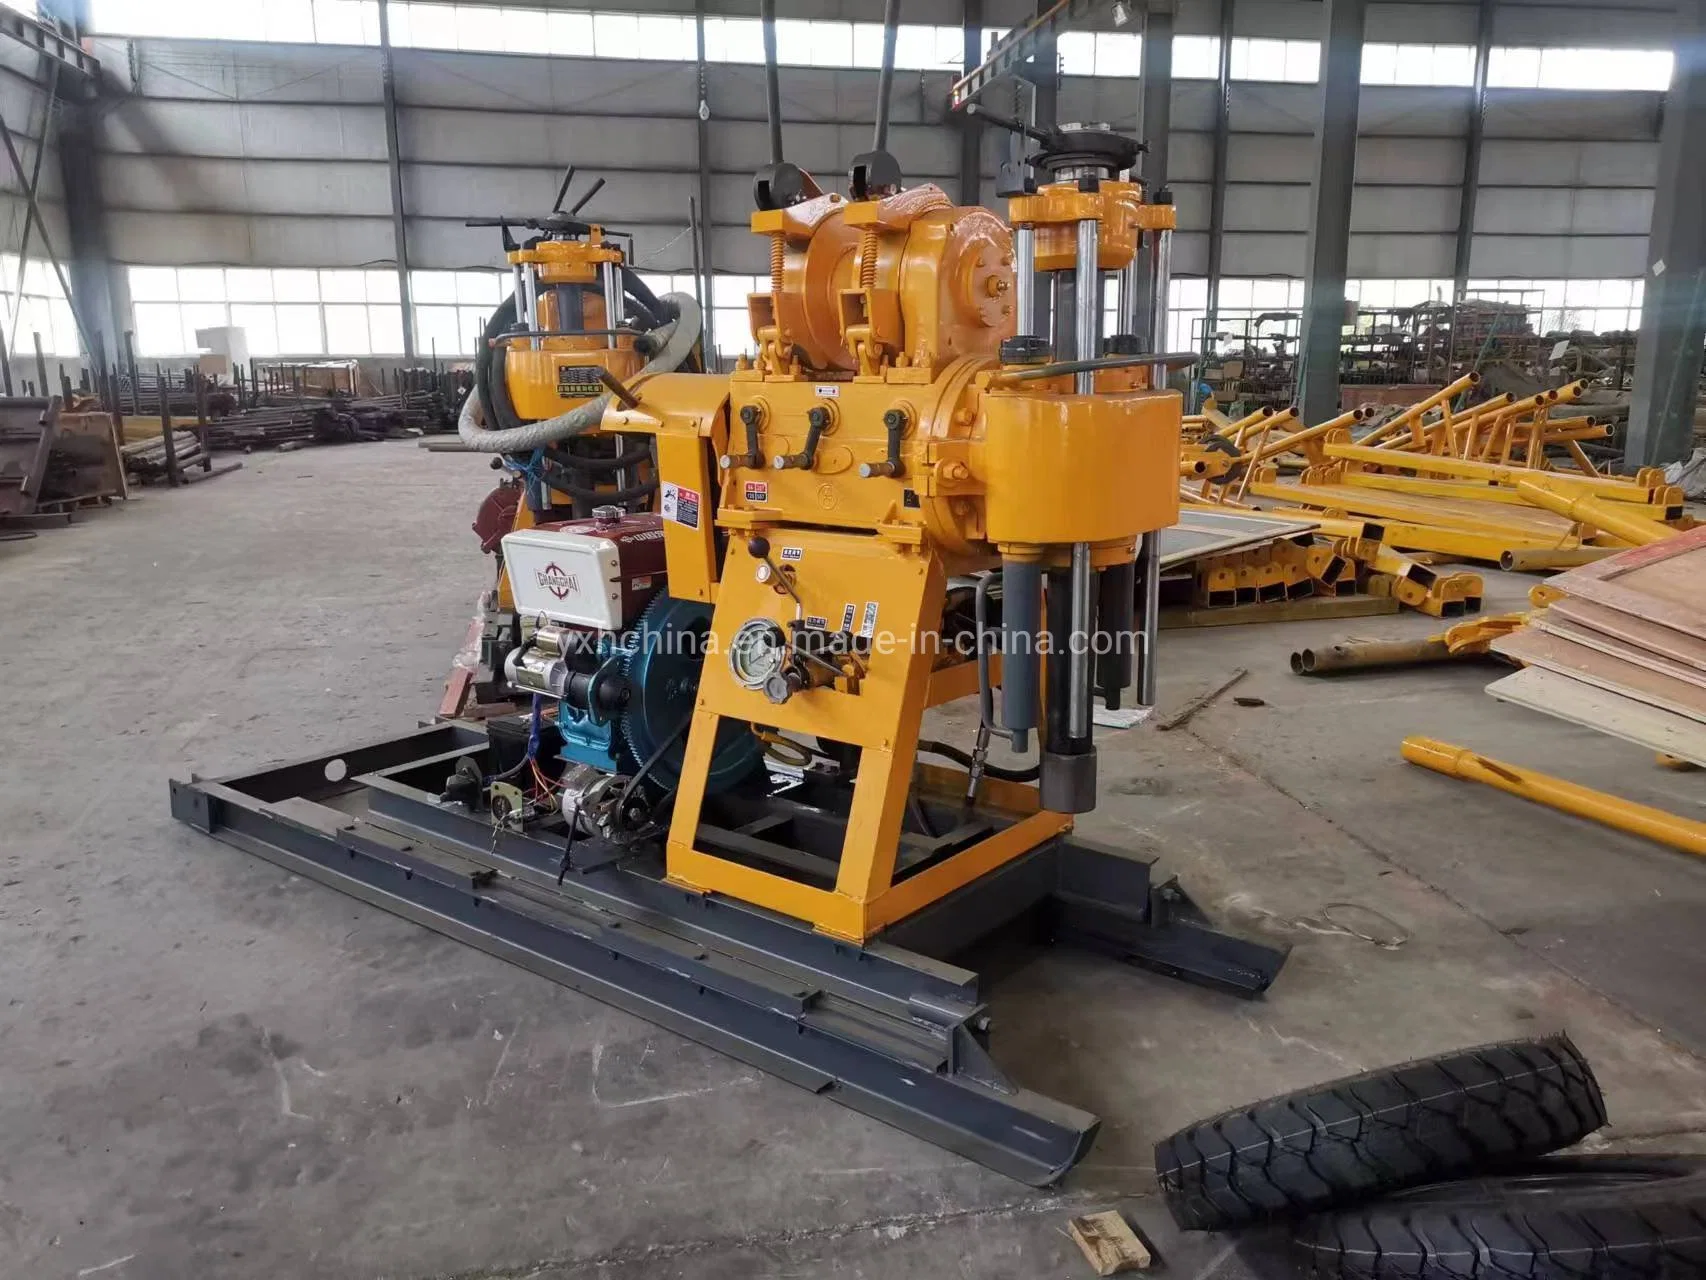 Hz-200yy 200m Depth Core Mining Drilling Rig Hot Sale Portable Core Drill Rig Geological Core Drill Rig on Promotion